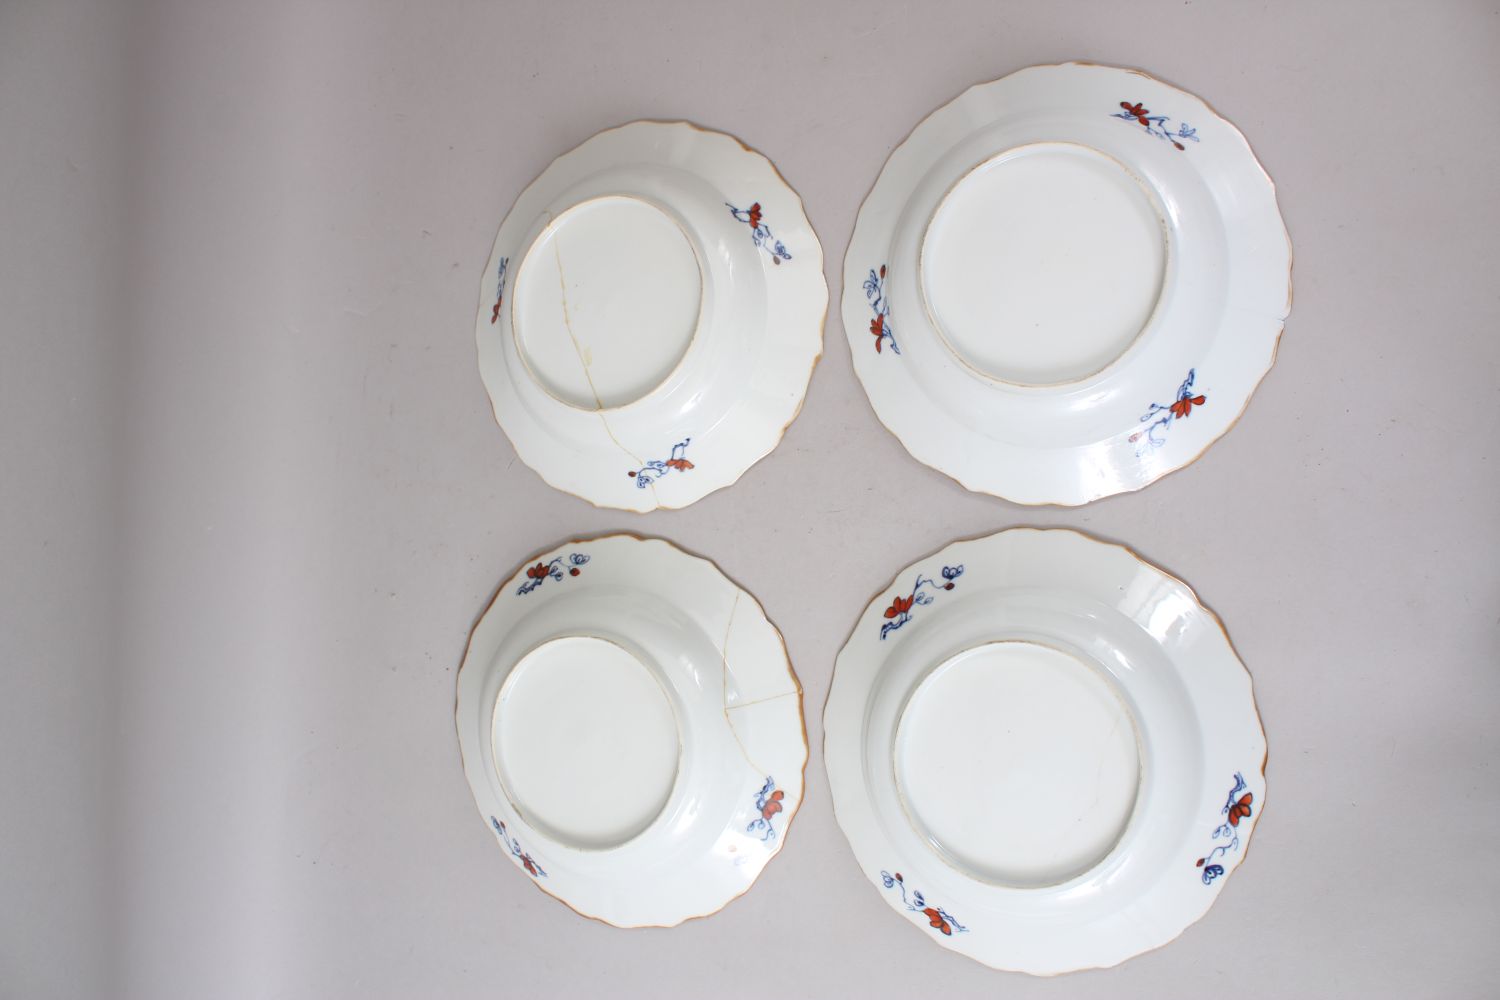 A GROUP OF FOUR 18TH CENTURY CHINESE QIANLONG PERIOD PORCELAIN SOUP PLATES, 21.5cm. - Image 4 of 4